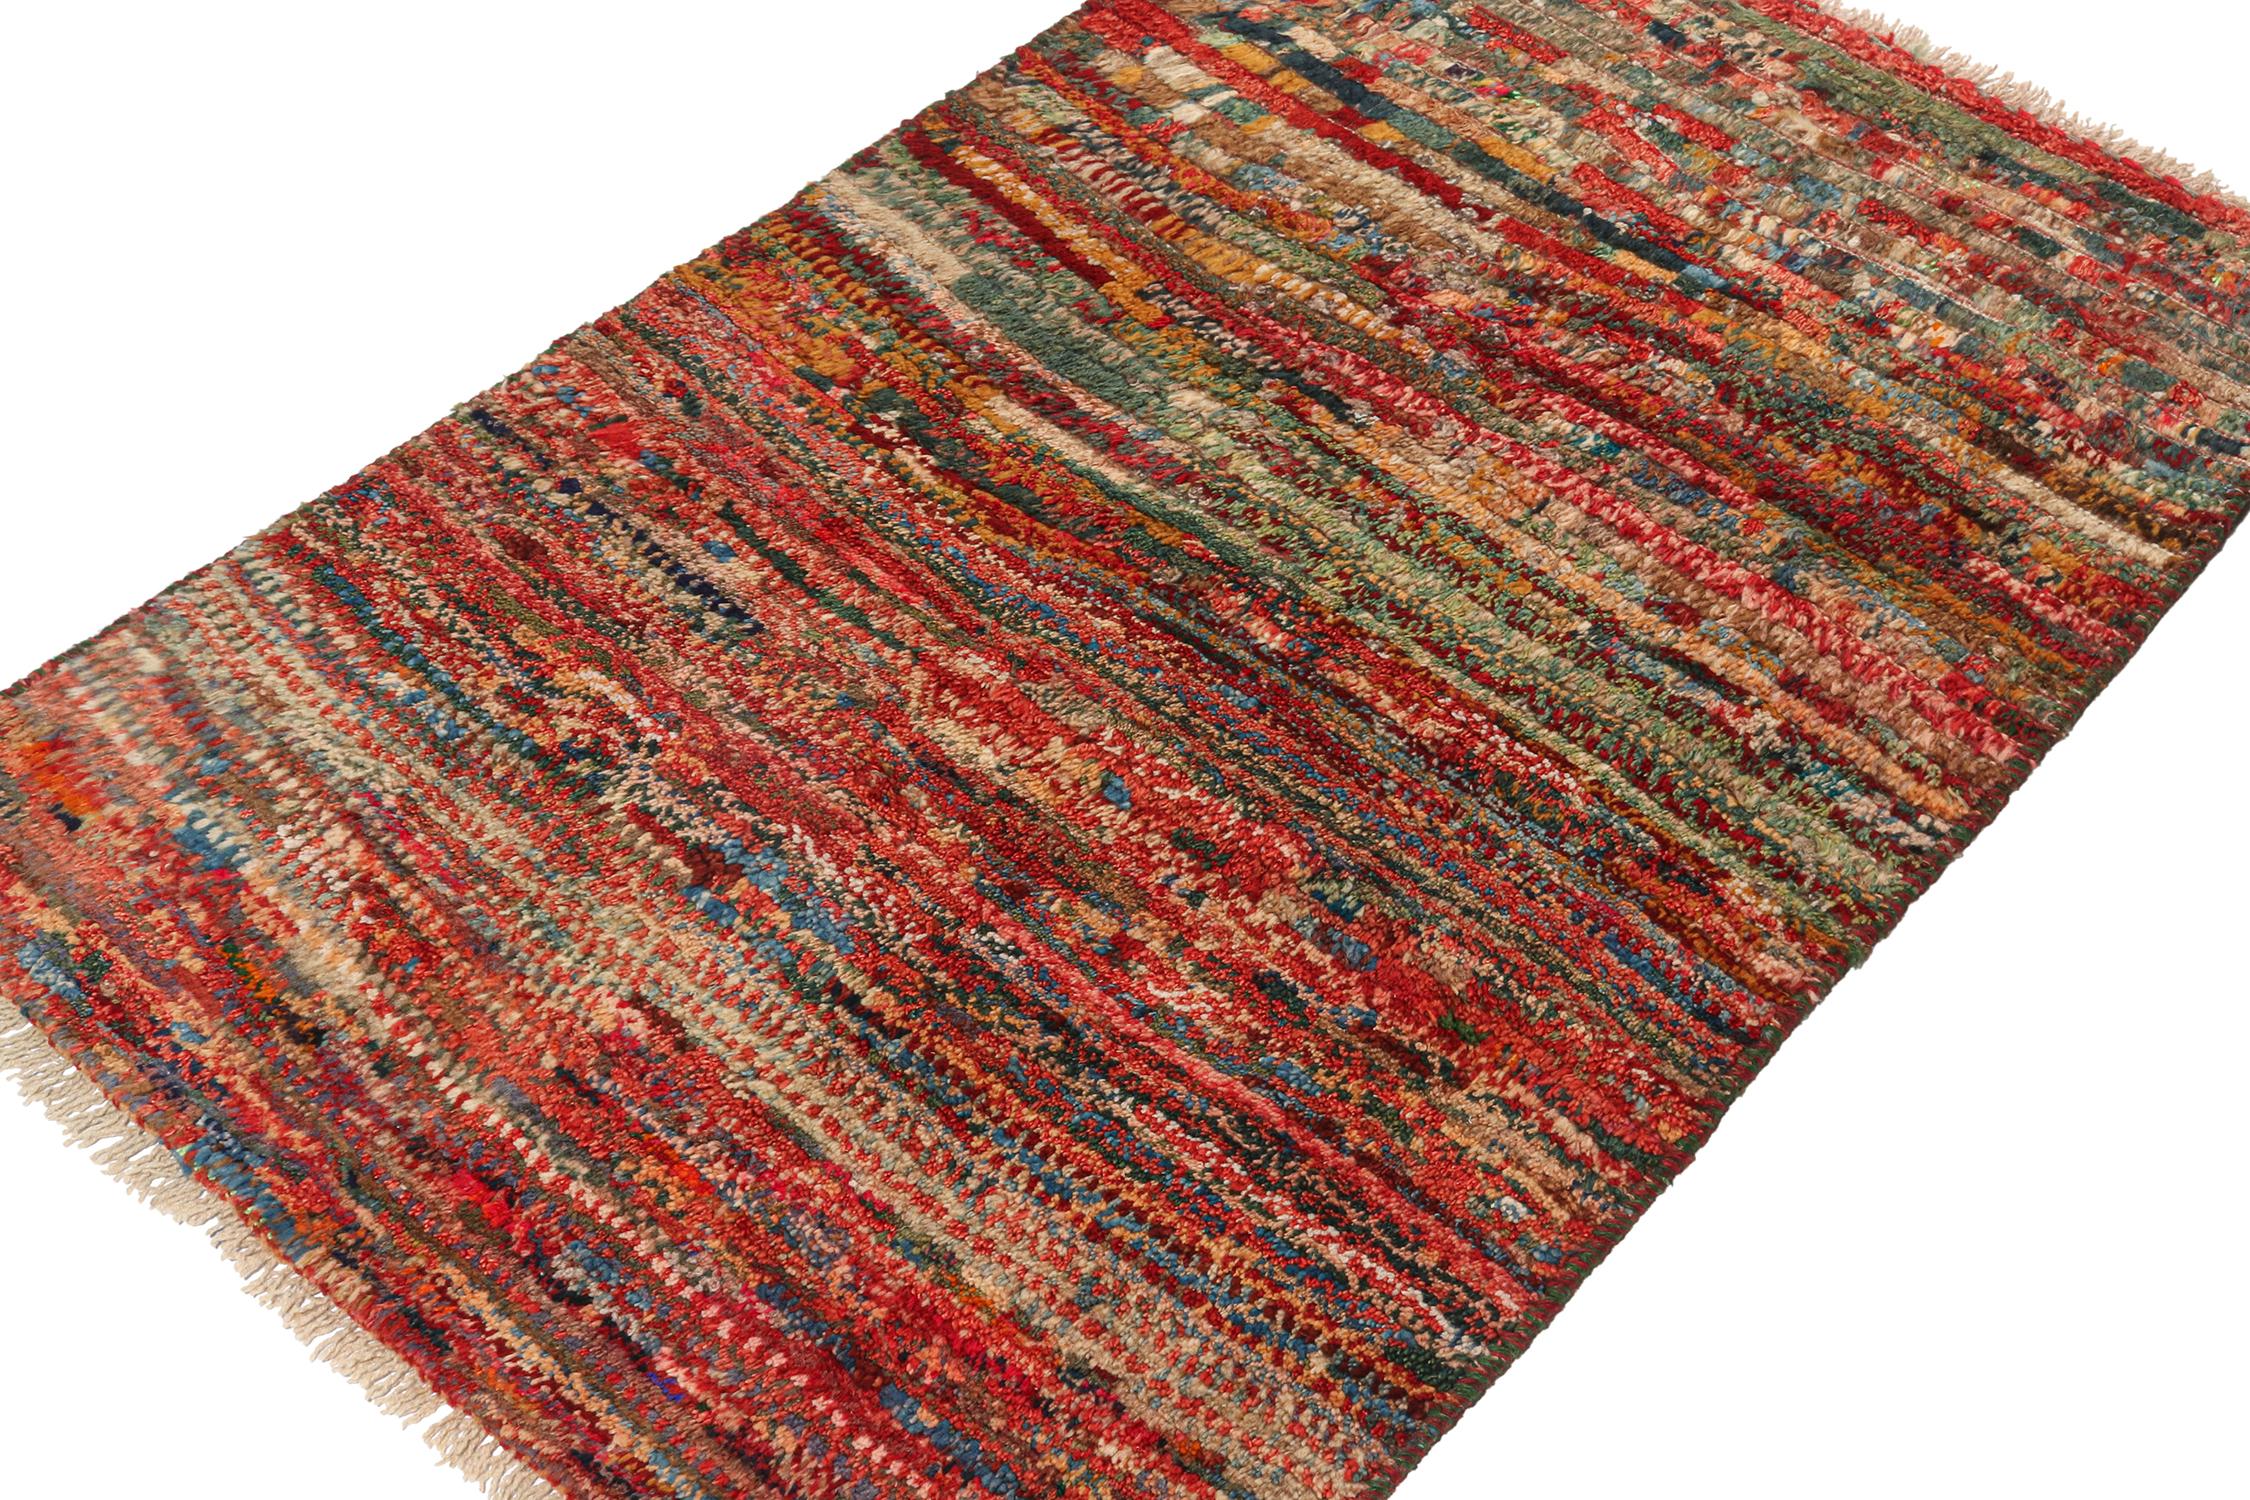 A vintage 3x4 Persian Gabbeh rug, making a grand entry to Rug & Kilim’s curation of rare tribal pieces. Hand-knotted in wool, originating circa 1950-1960. 

On the Design: 

This piece features a gorgeous play of polychromatic tones to